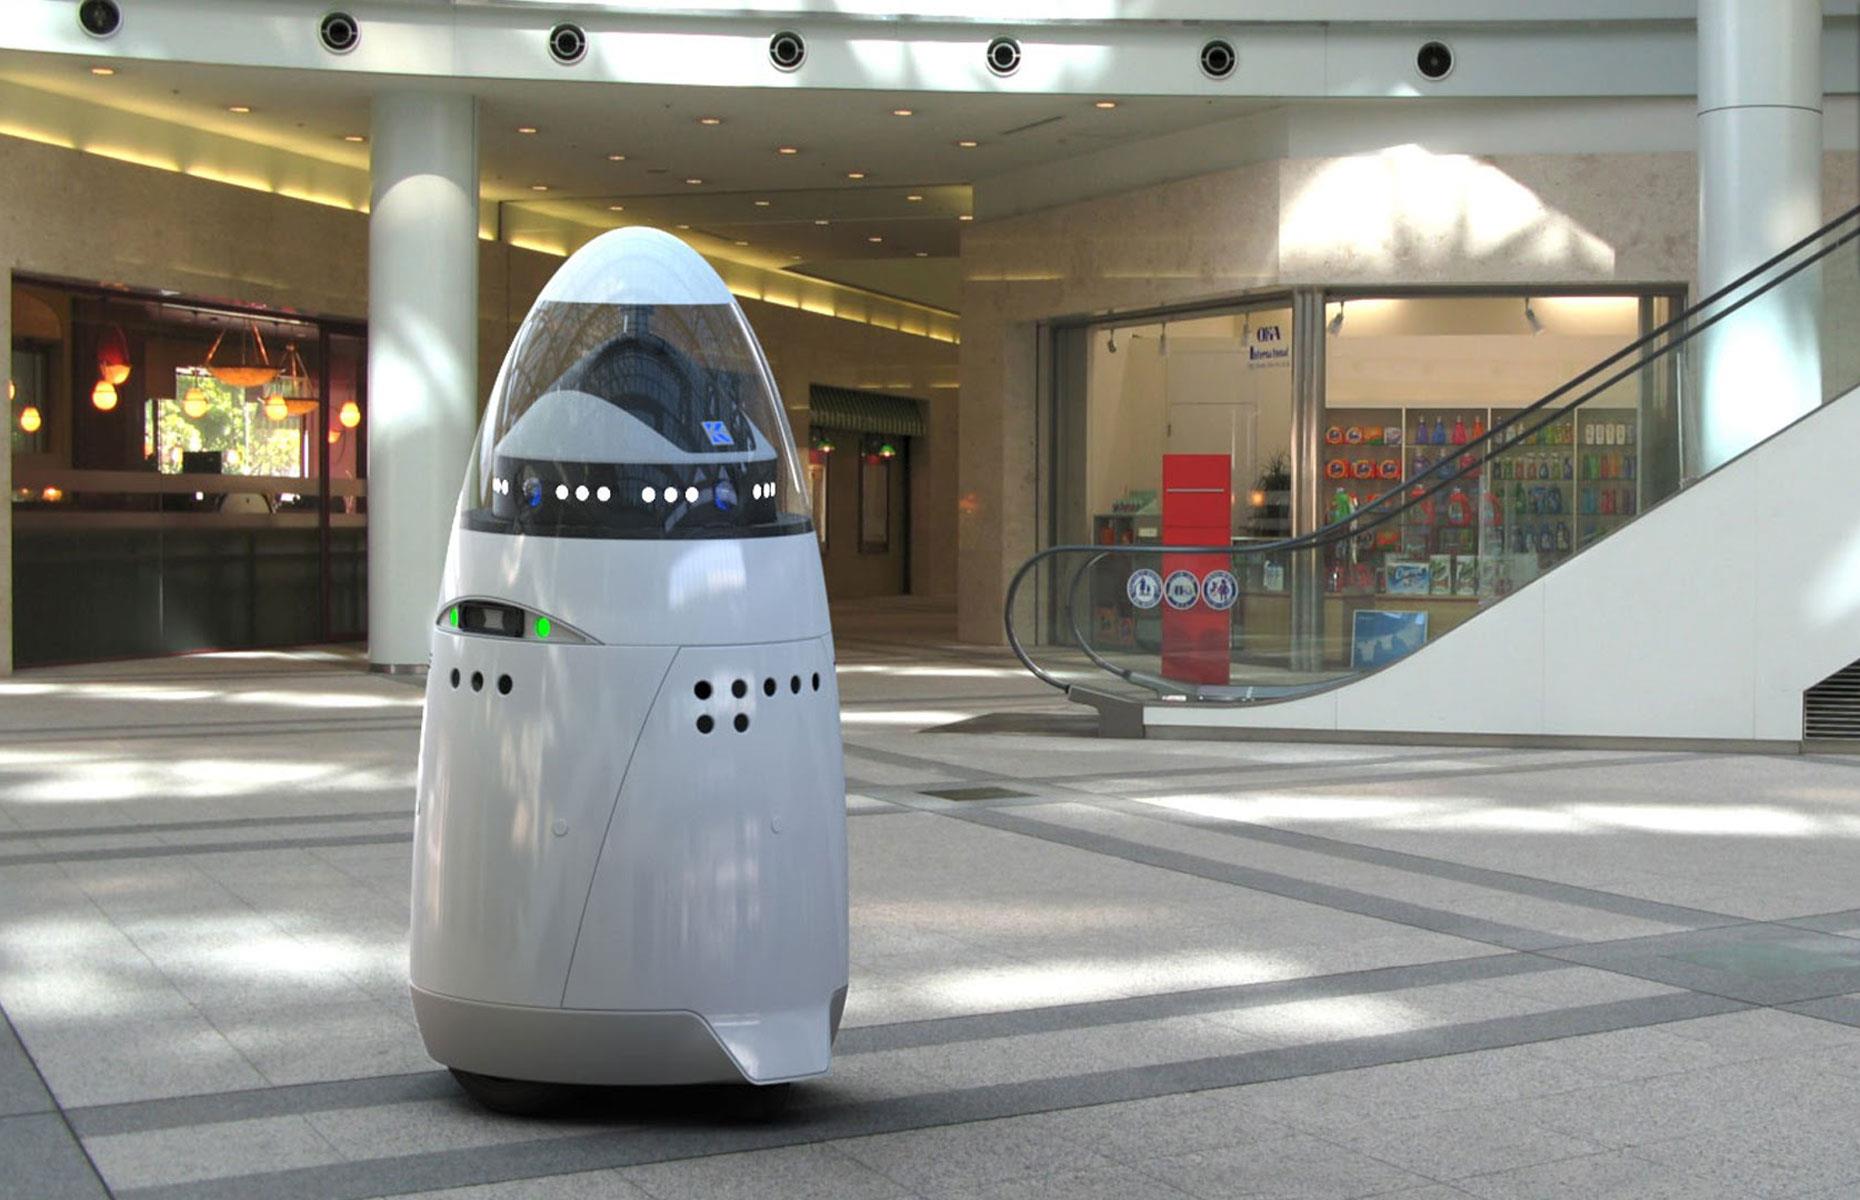 <p>Robotic security guards are already patrolling businesses, and look set to relieve more of their human counterparts of their jobs soon.</p>  <p>Knightscope's K5 security robot constantly monitors its surroundings for suspicious behavior and can detect potentially criminal "audio events", such as glass breaking or people screaming. Fully autonomous, the robots even charge themselves without human intervention. An impressive 24 of the robots were installed in shopping malls and offices in Silicon Valley, California in 2015. But they haven't been a resounding success; in 2016, one rogue K5 robot knocked down and (non-fatally) ran over a toddler.</p>